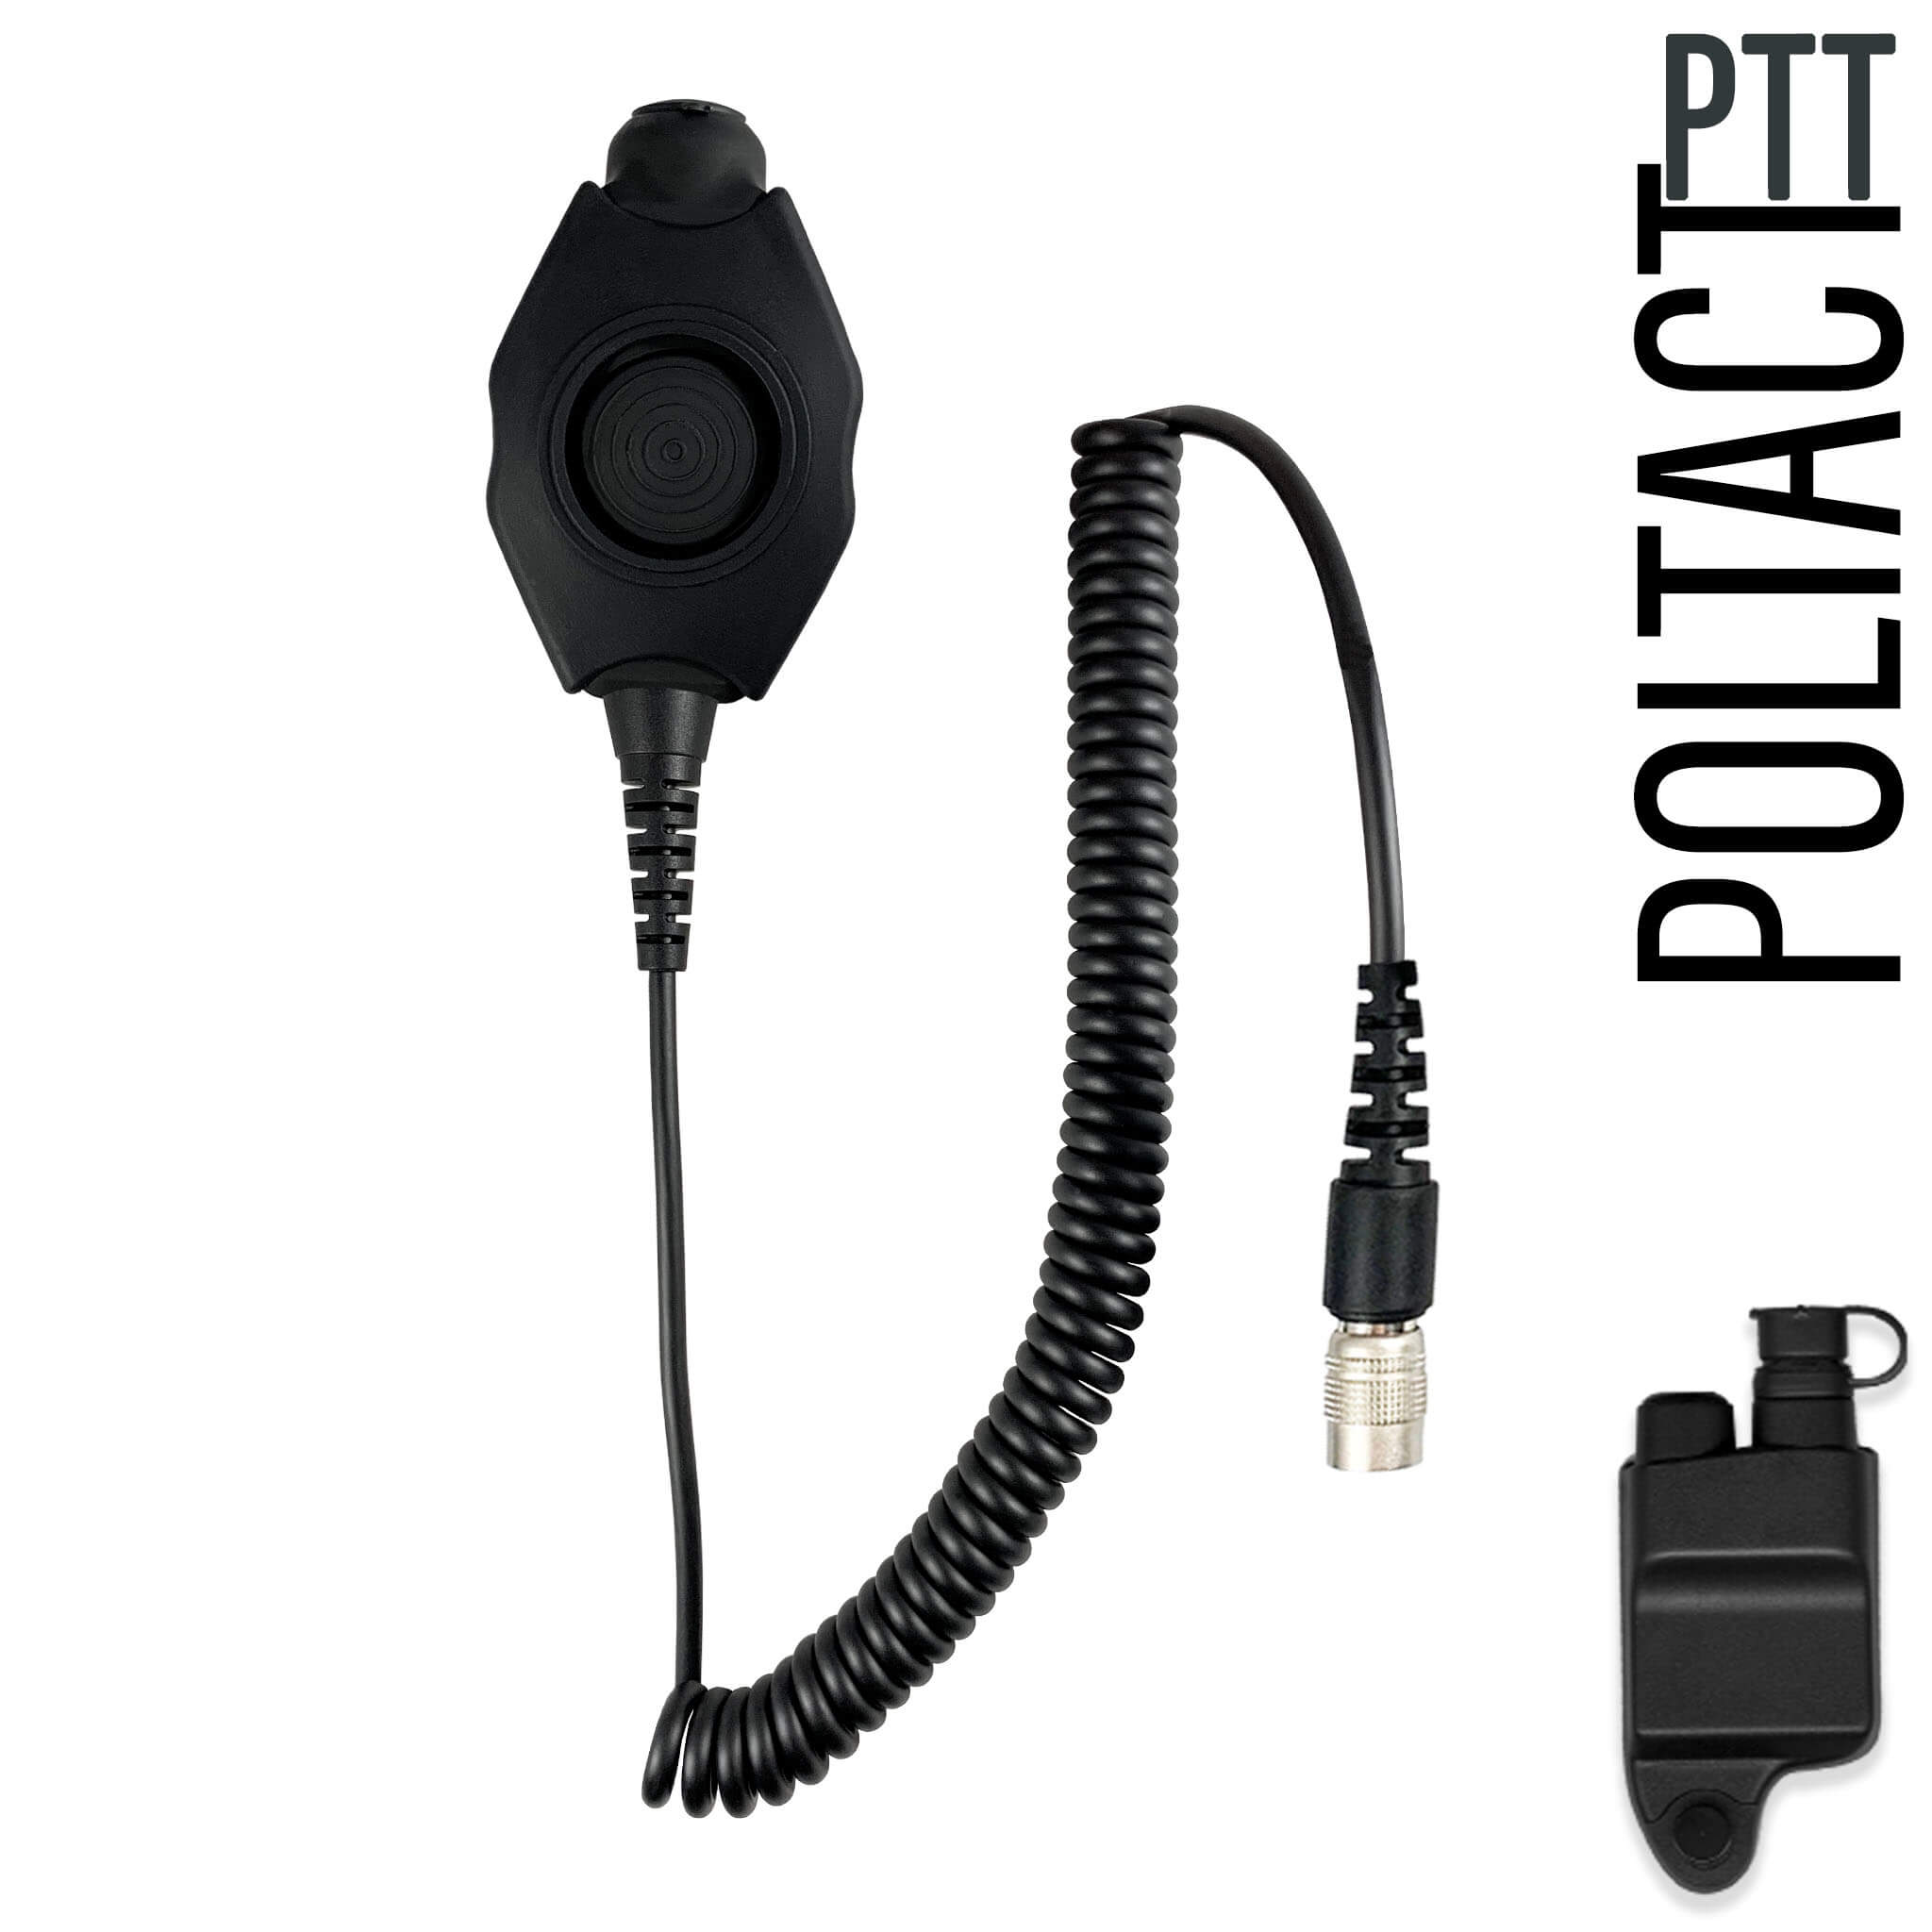 Headset PTT Harness w/ Rapid Release Connector/Adapter: PT-PPT-27RR - Guaranteed to work w/: M/A Com (Harris)- 700P, 700Pi, 710P, P5100, P5130, P5150, P5200, P7100, P7130, P7150, P7170, P7200, P7230, P7250, P7270 & More